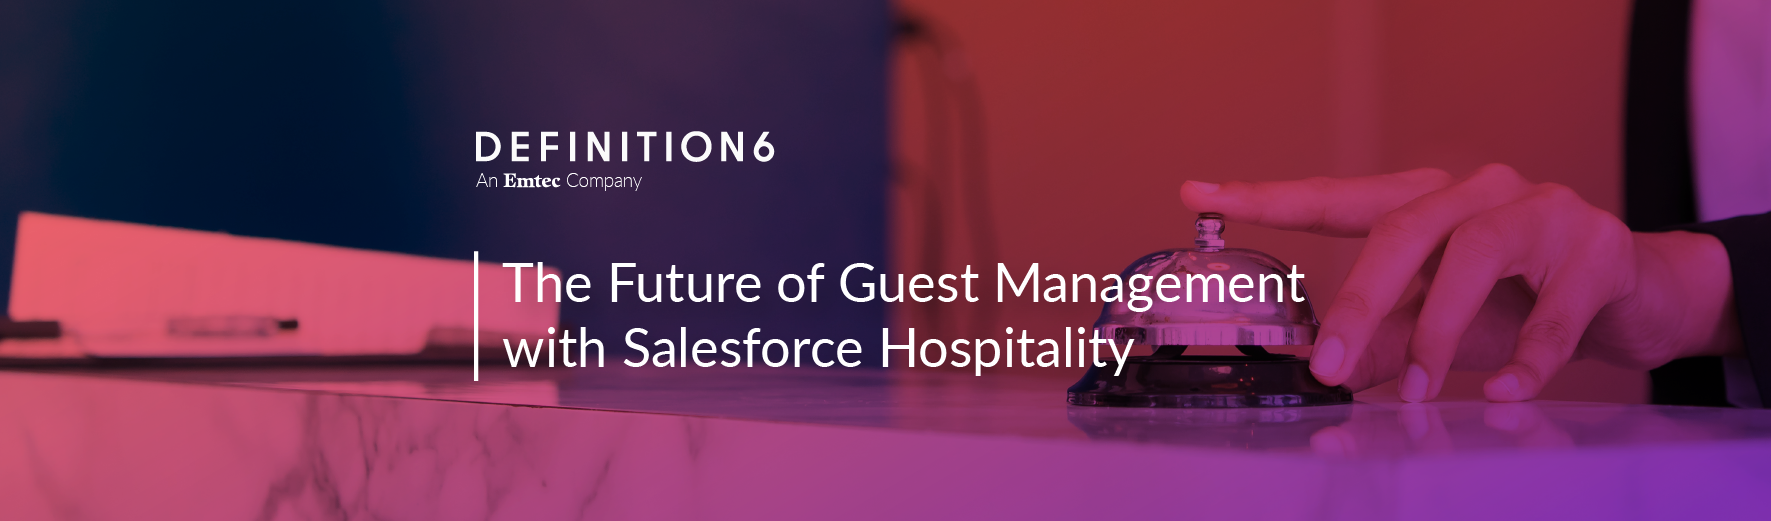 salesforce hospitality + The Future of Guest Management with Salesforce Hospitality